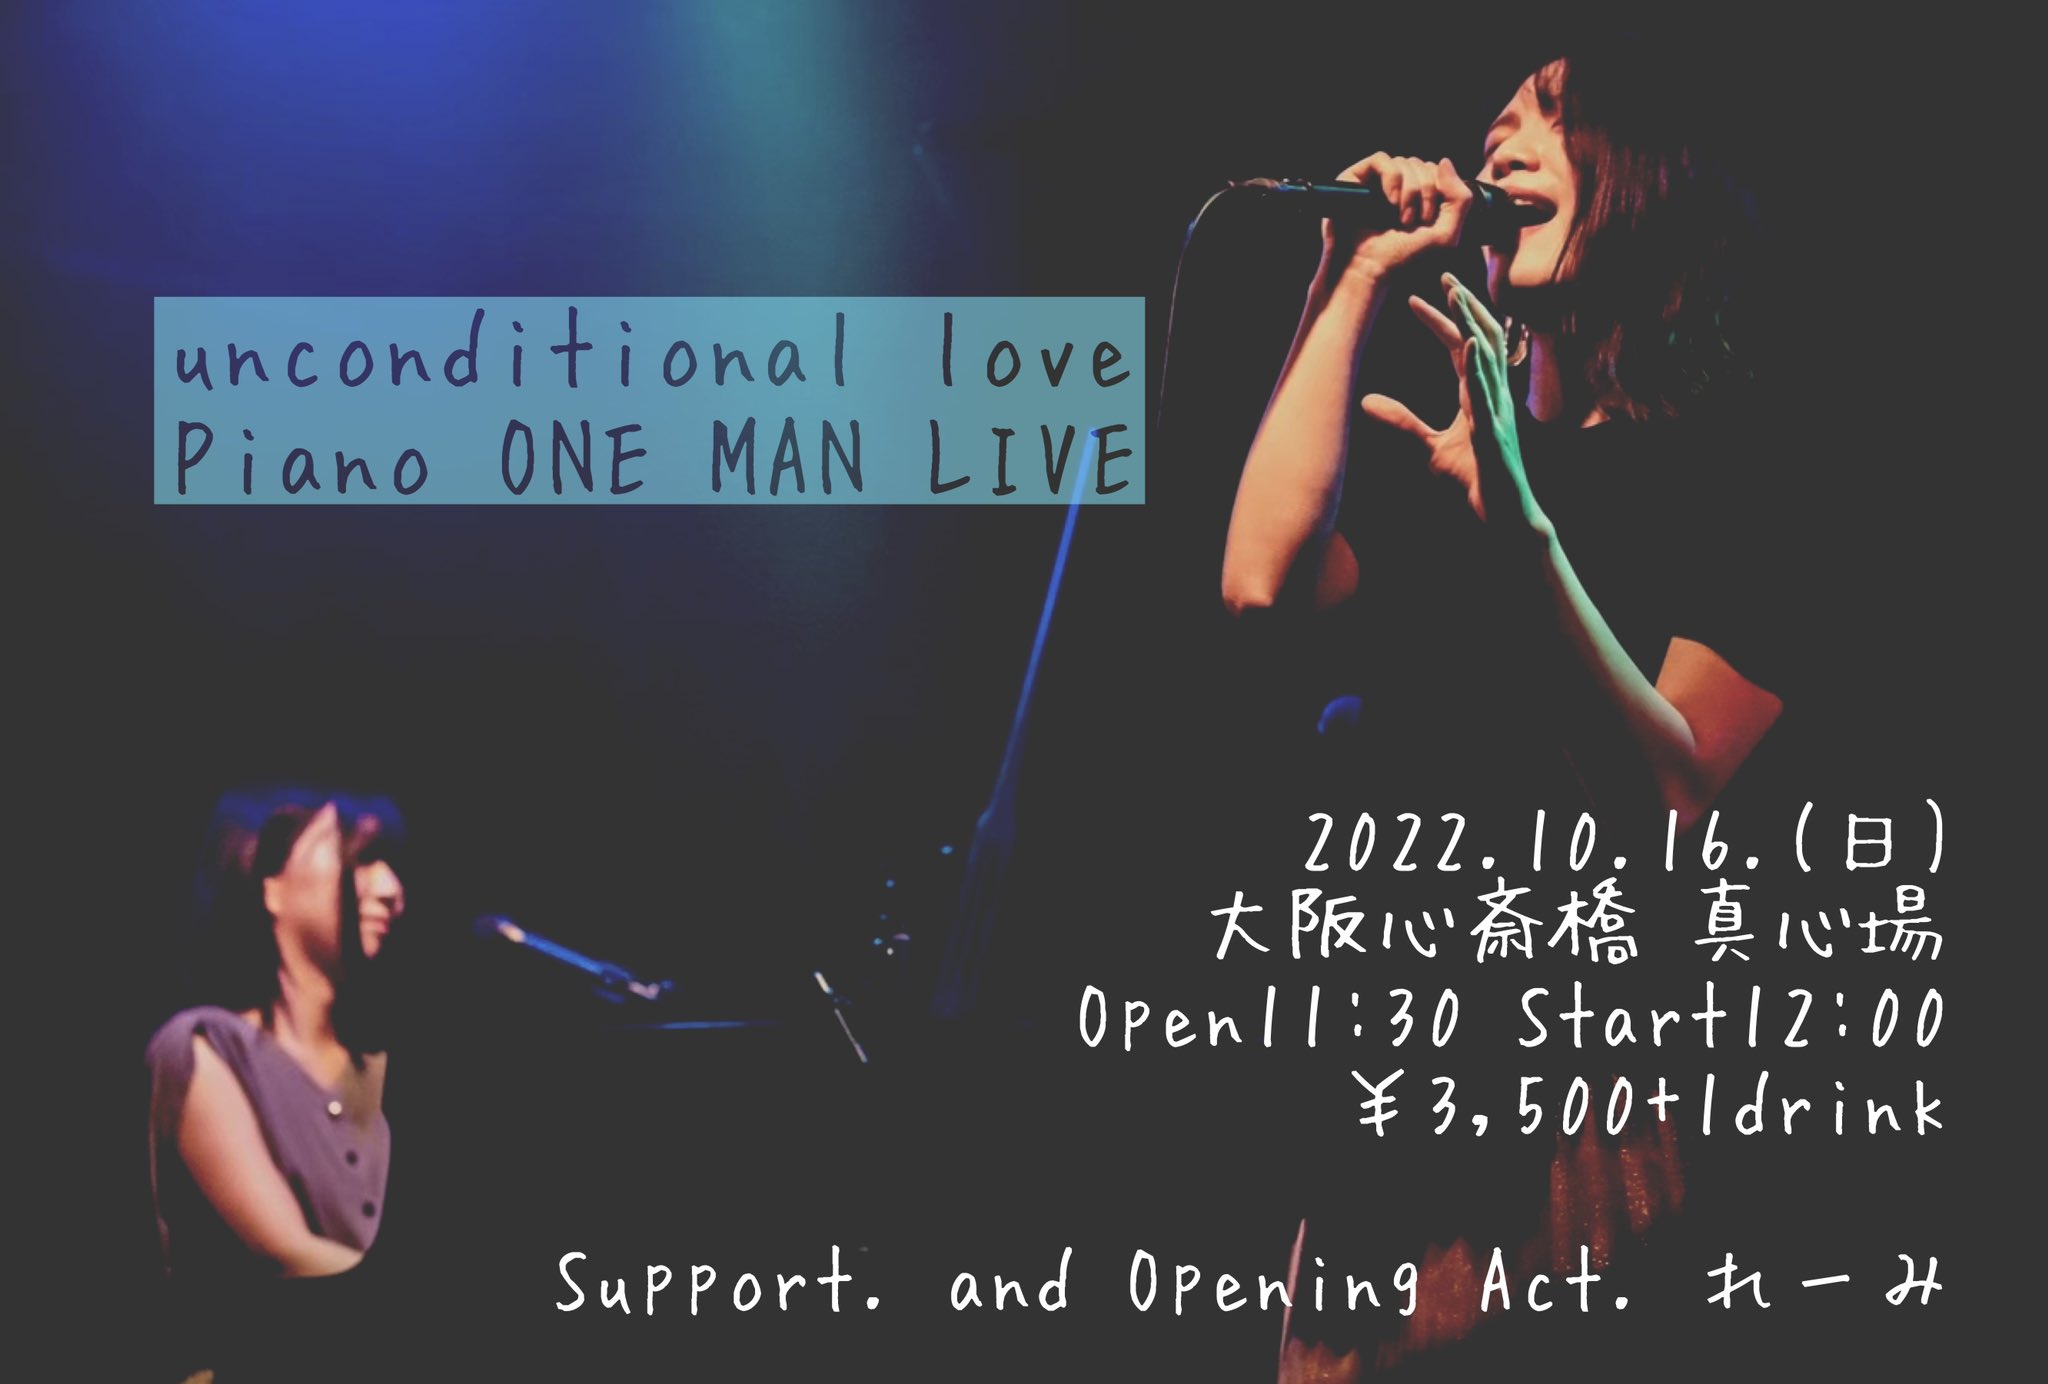 unconditional love Piano ONE MAN LIVE